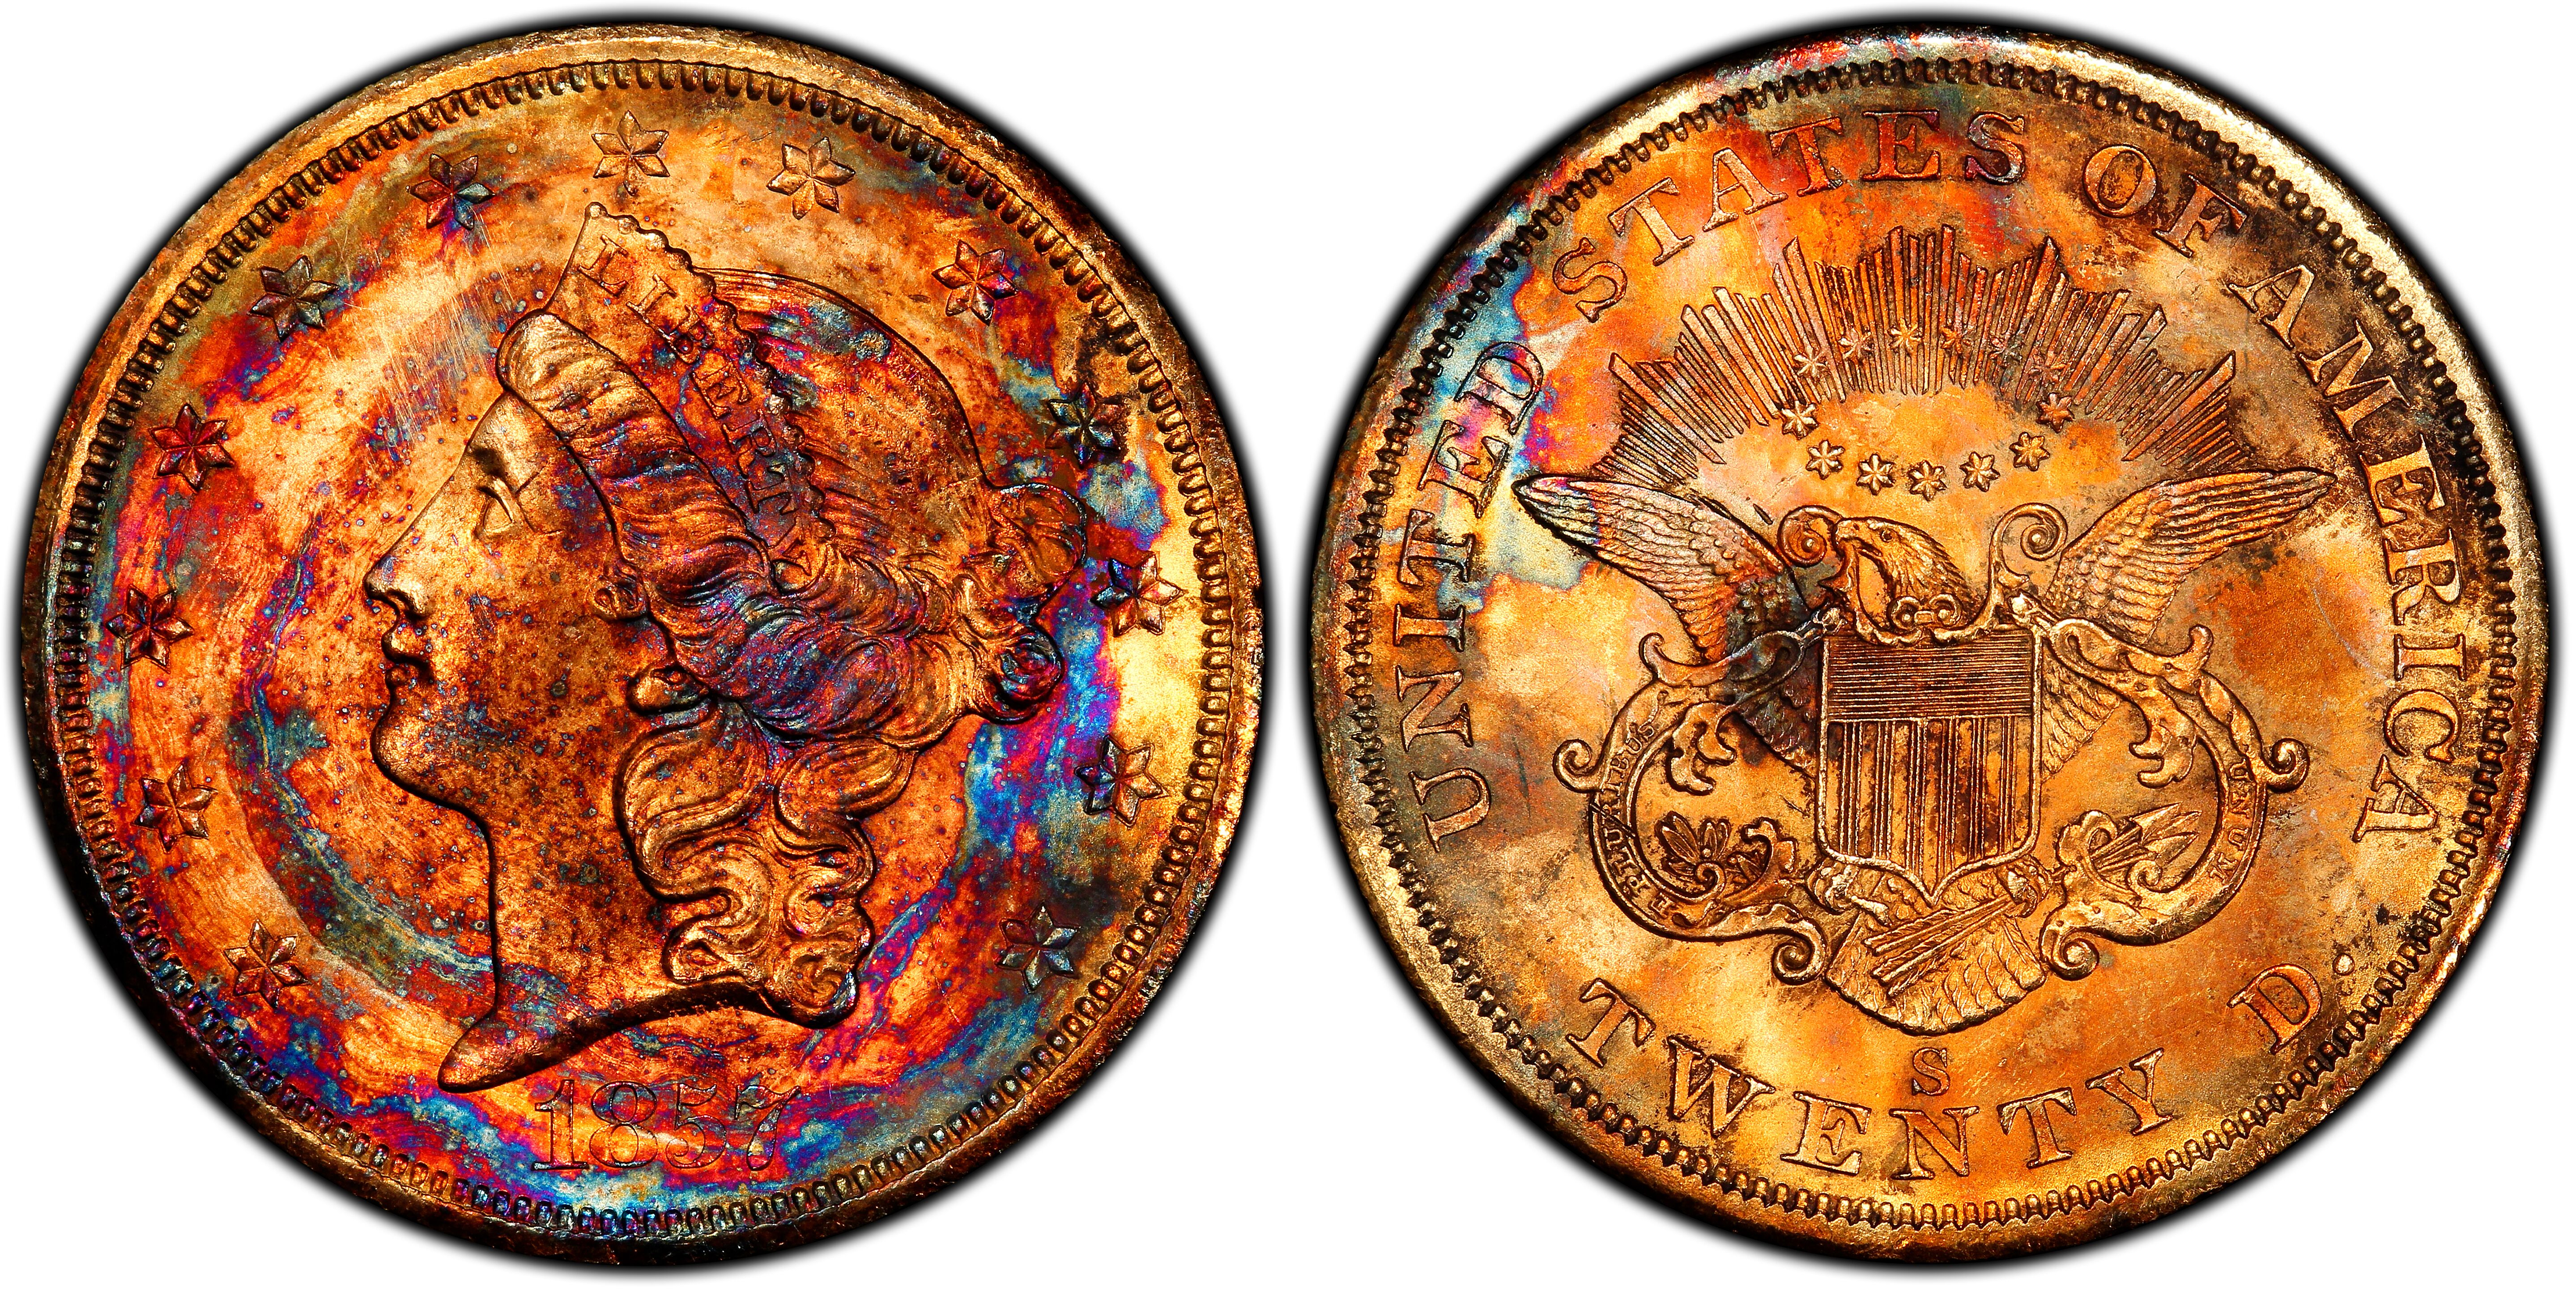 enlarged image for Colorful 1857-S Double Eagle From SS Central America Treasure To Appear At ANA Philly Show